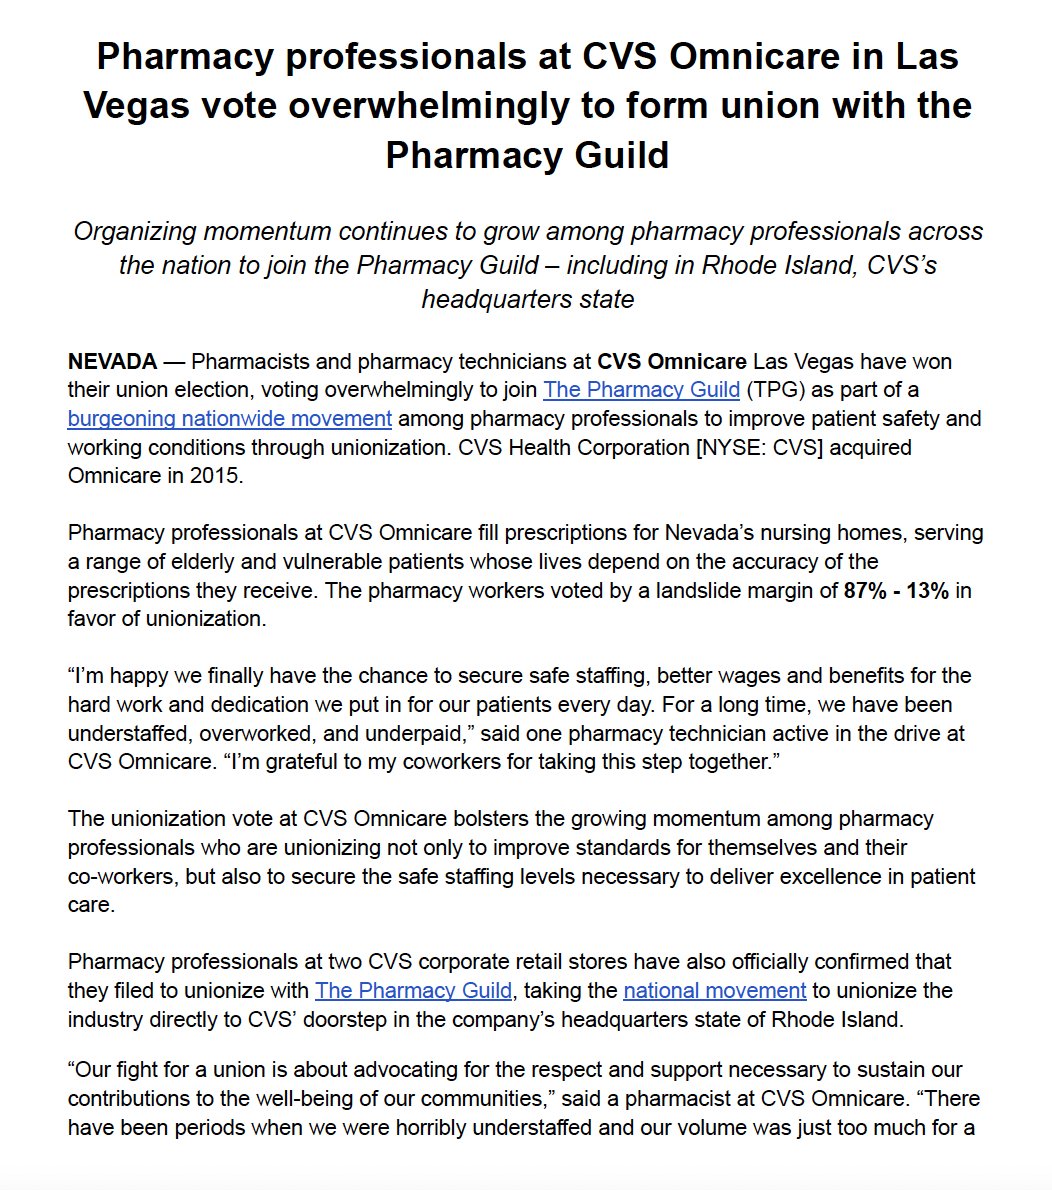 BREAKING: CVS Omnicare pharmacy professionals in Las Vegas have voted overwhelmingly to unionize with The Pharmacy Guild with a landslide of 87% in favor. A dawn of a new era for safe staffing and patient care. 

Here’s to our first union victory and many more to come! #1u